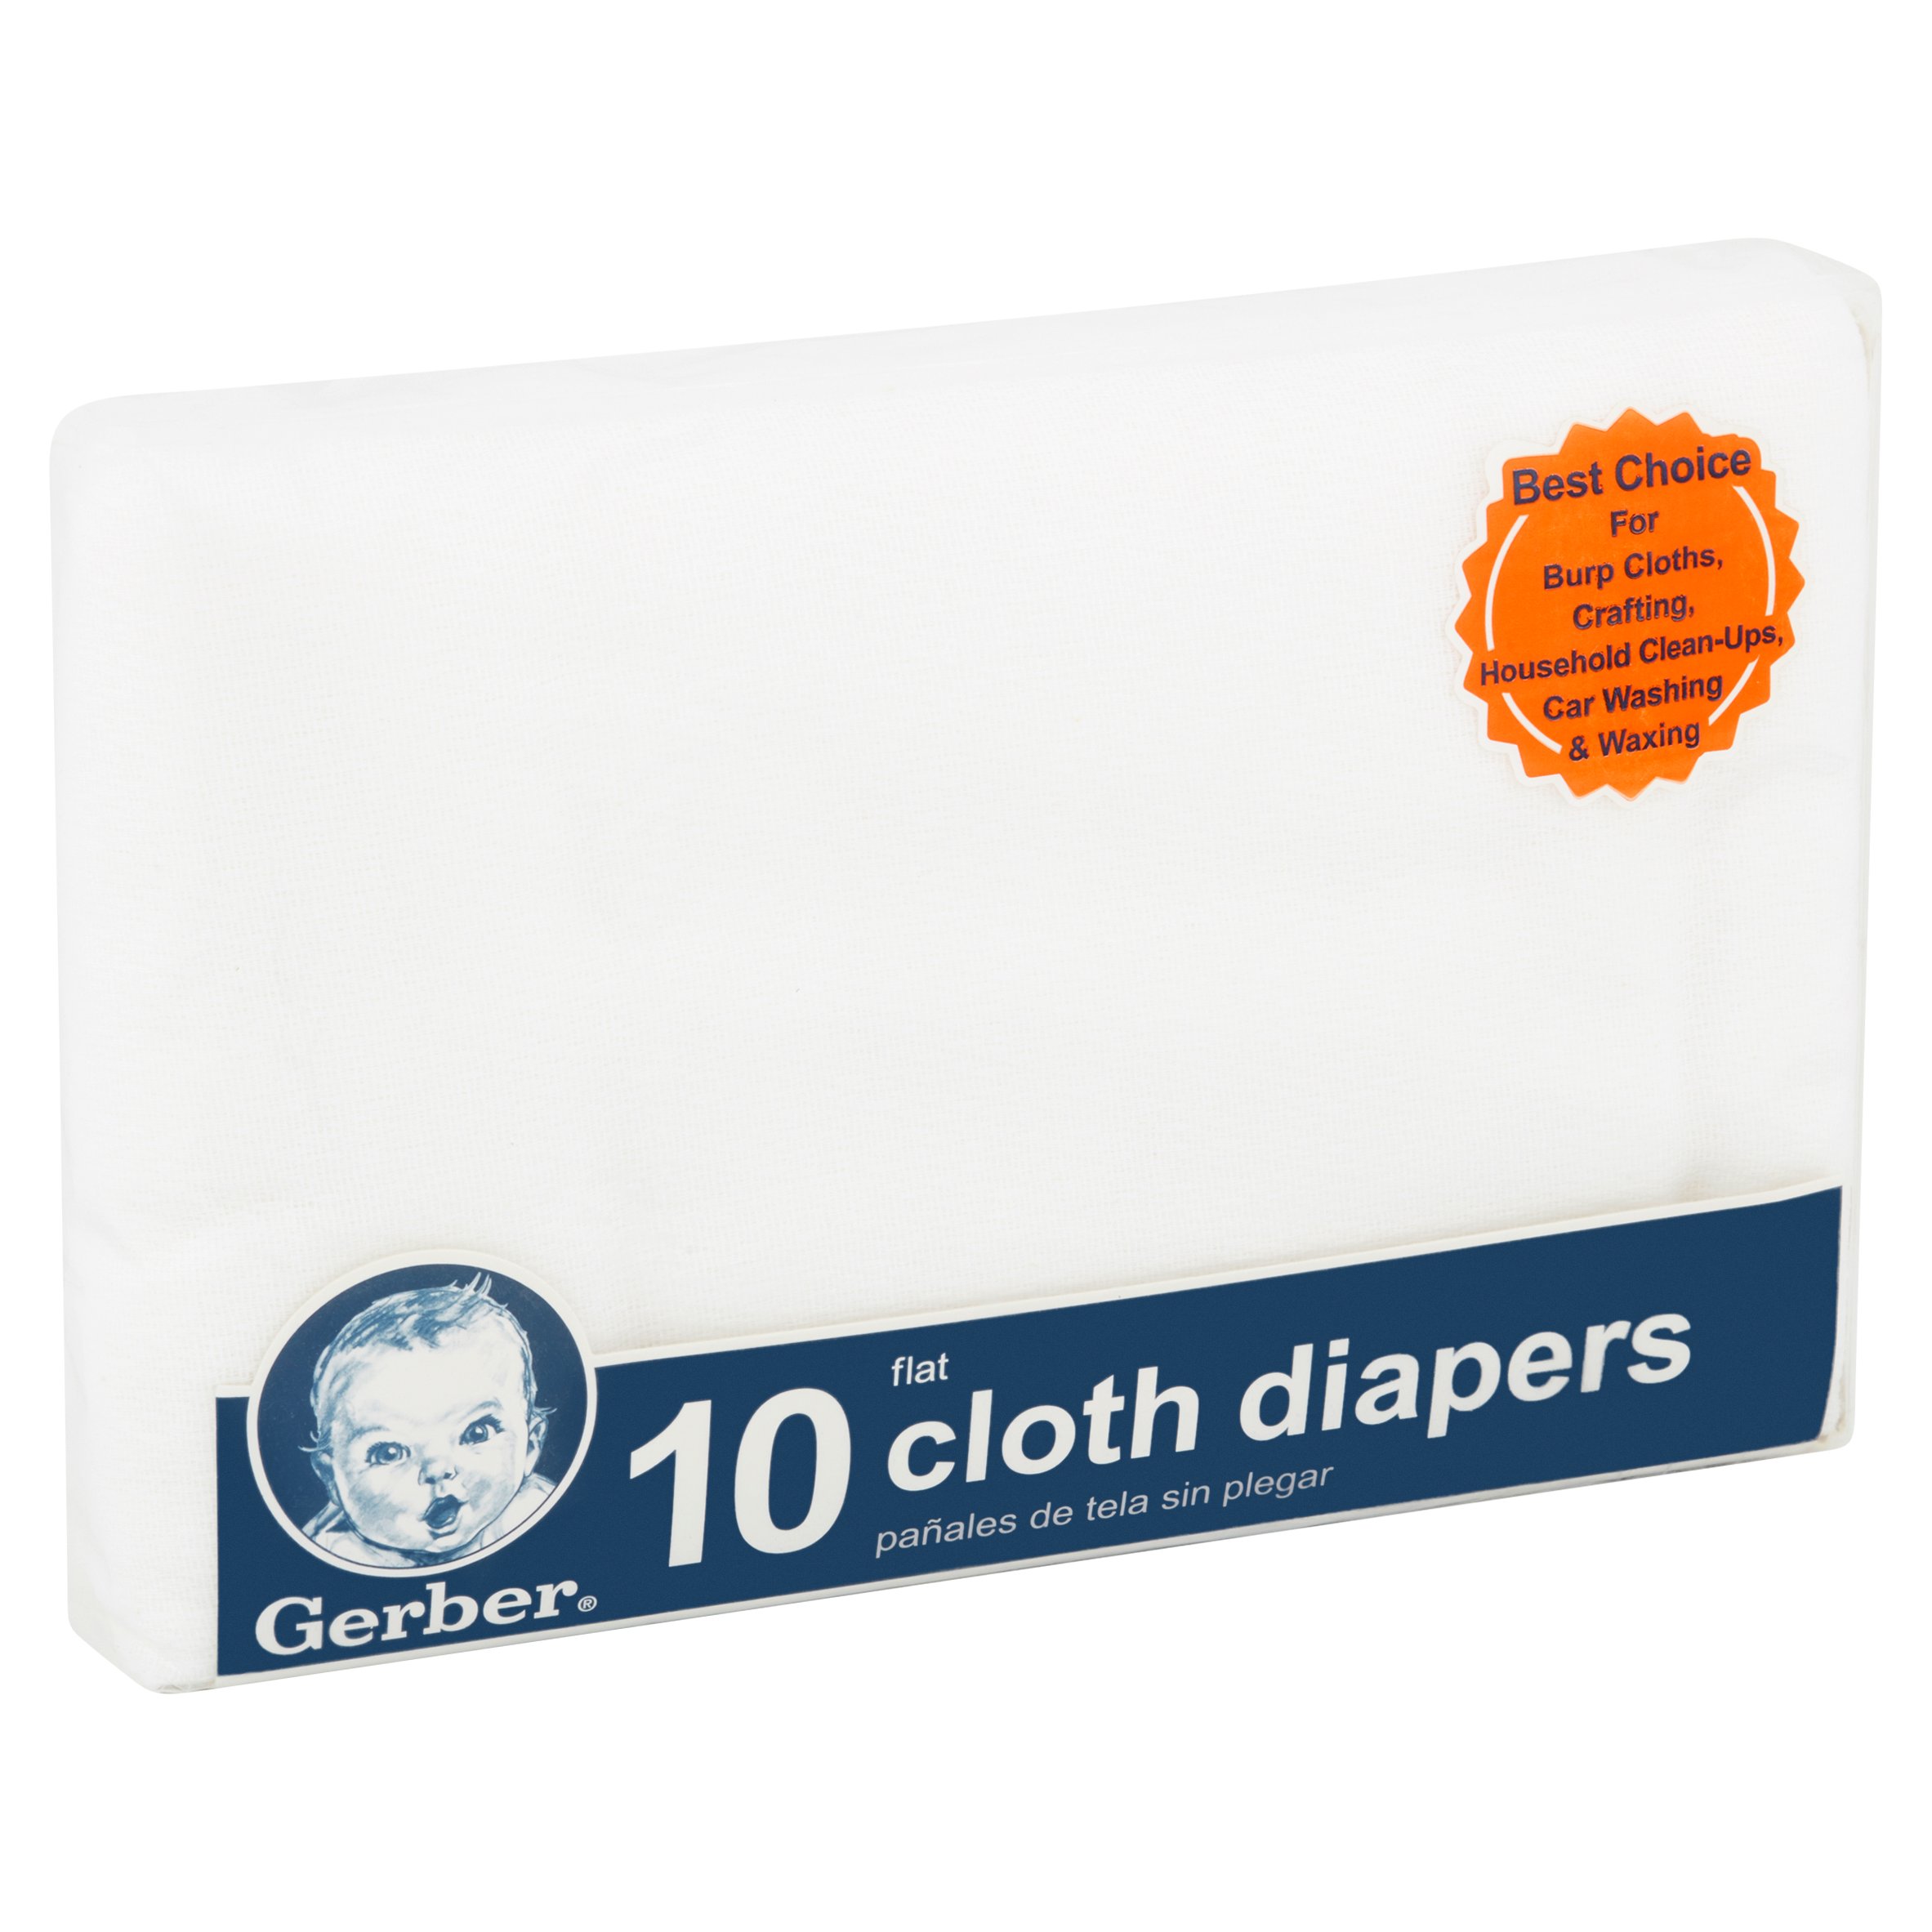 Gerber 100% Cotton Flatfold Cloth Baby Diaper, White 10 Pack - image 4 of 8